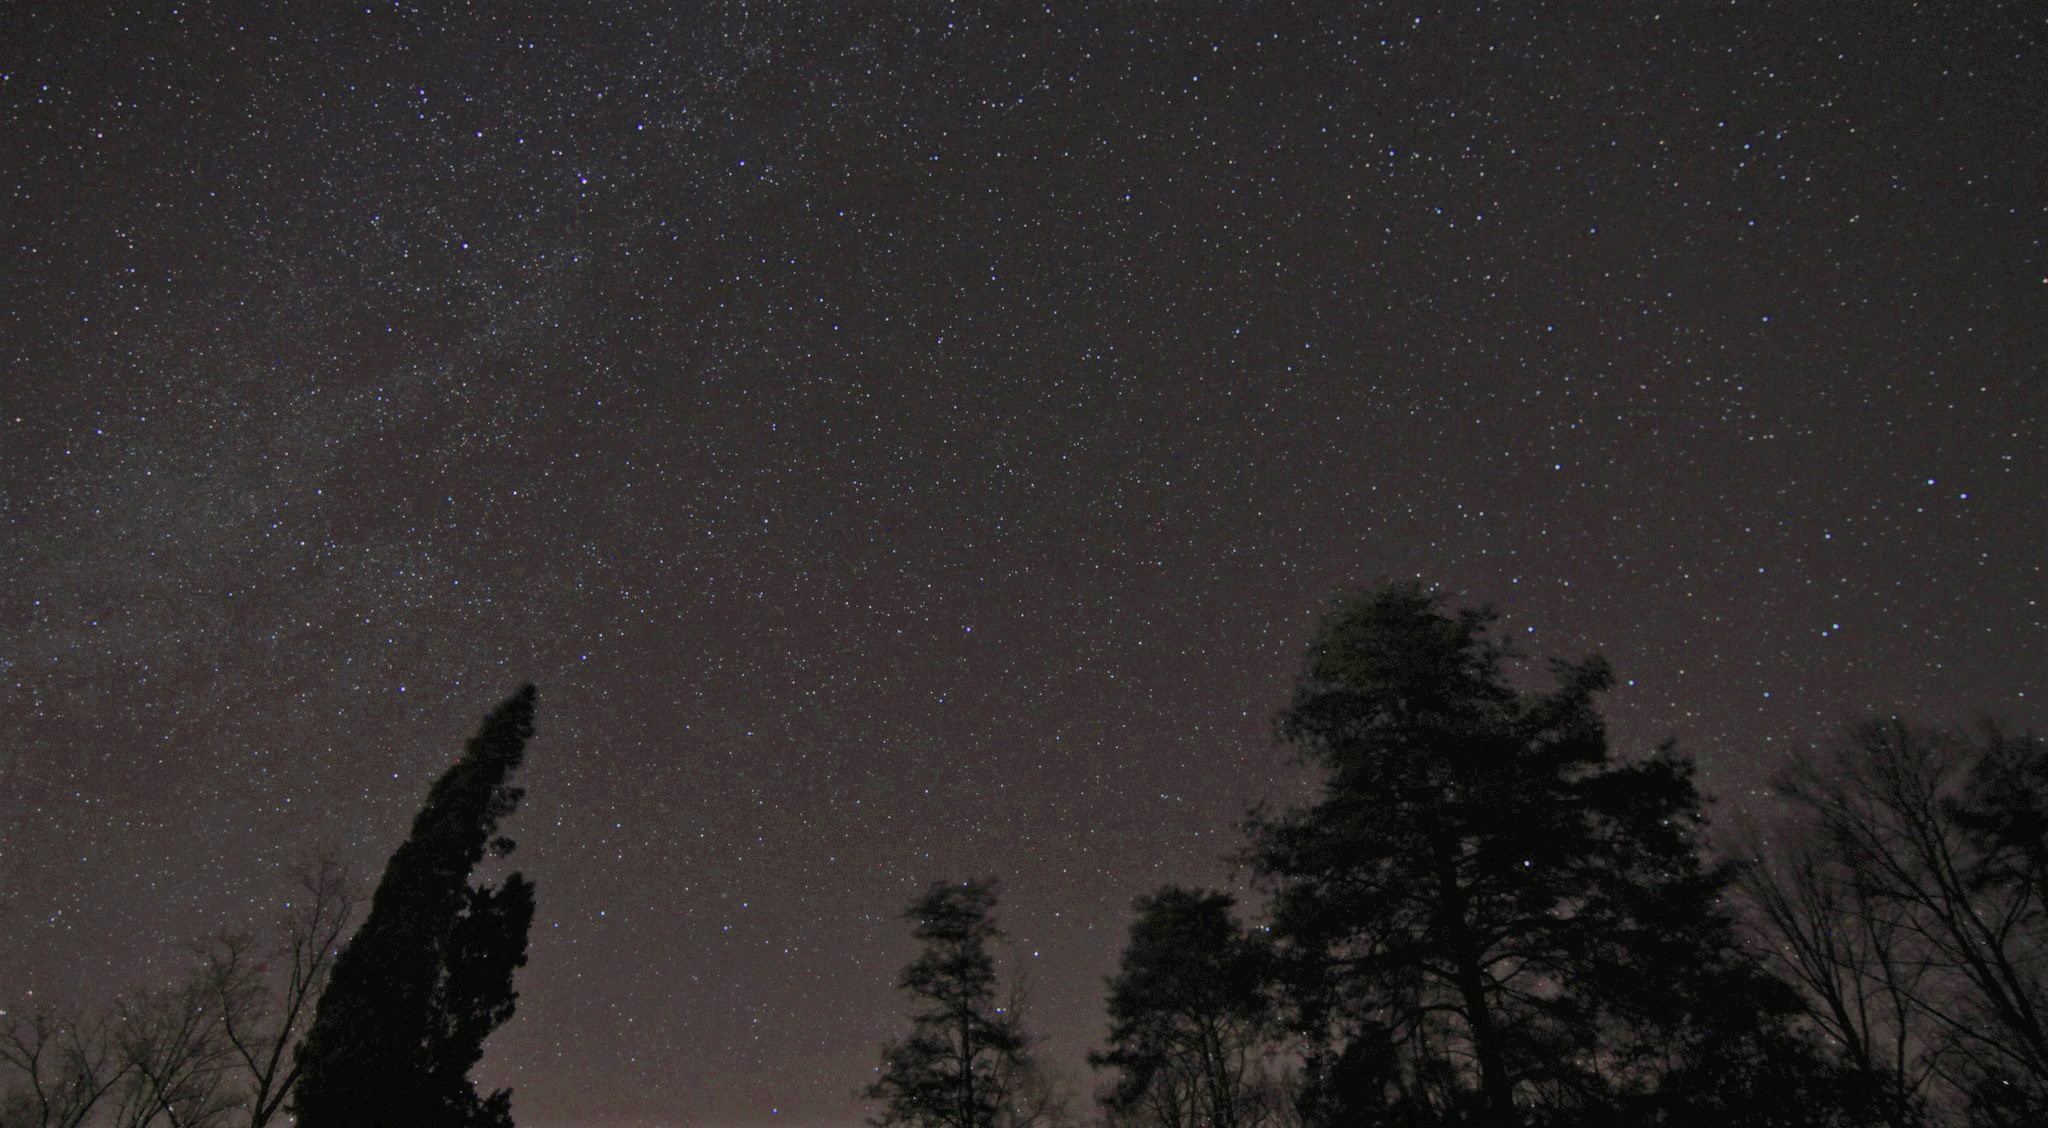 Thousands of tiny stars are seen on a dark sky with trees silhouetted in the foreground.